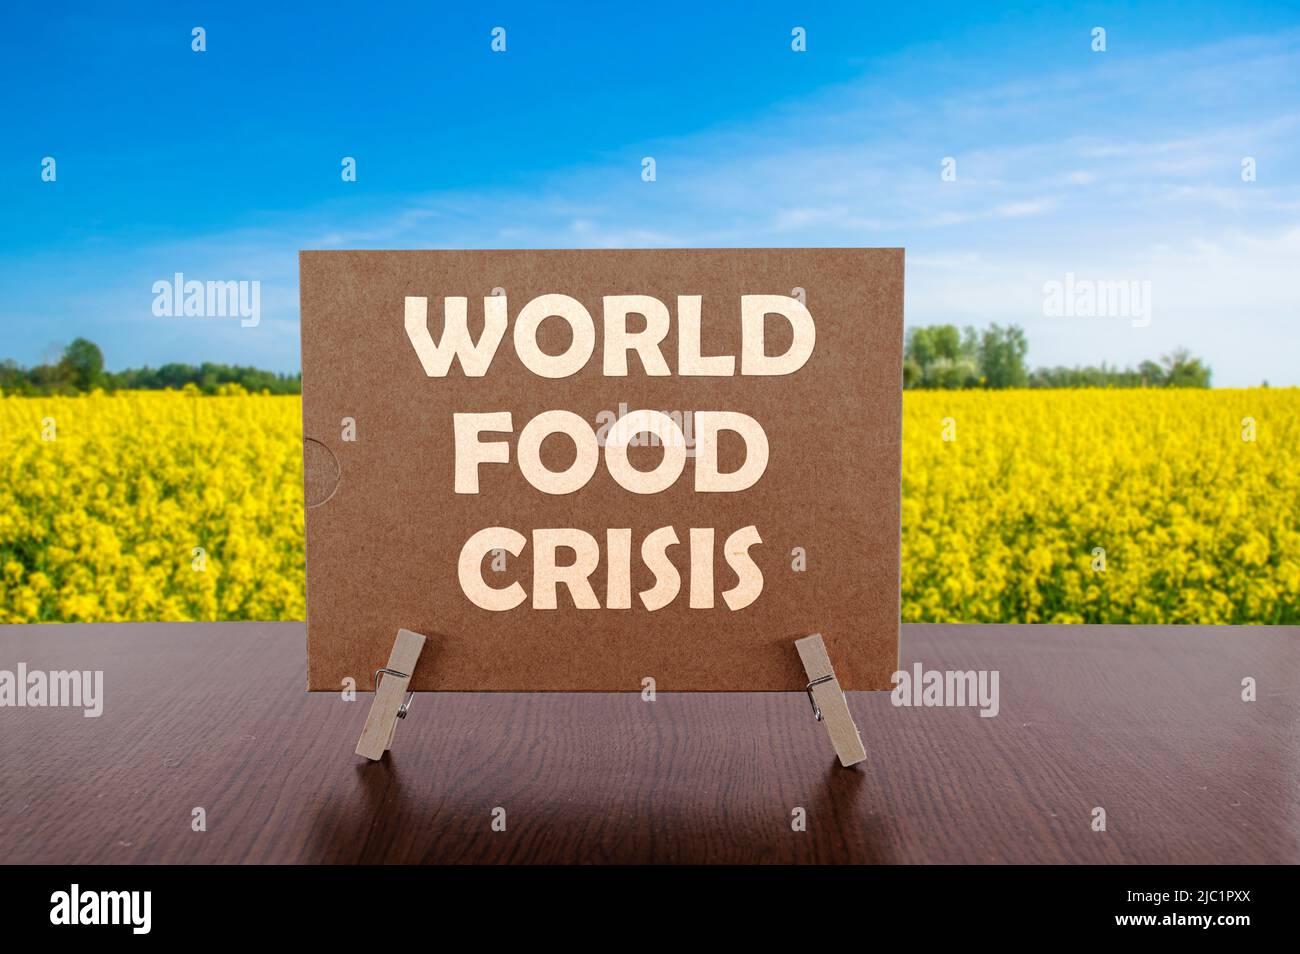 World food crisis text on card on the table with yellow field and blue sky background. Stock Photo